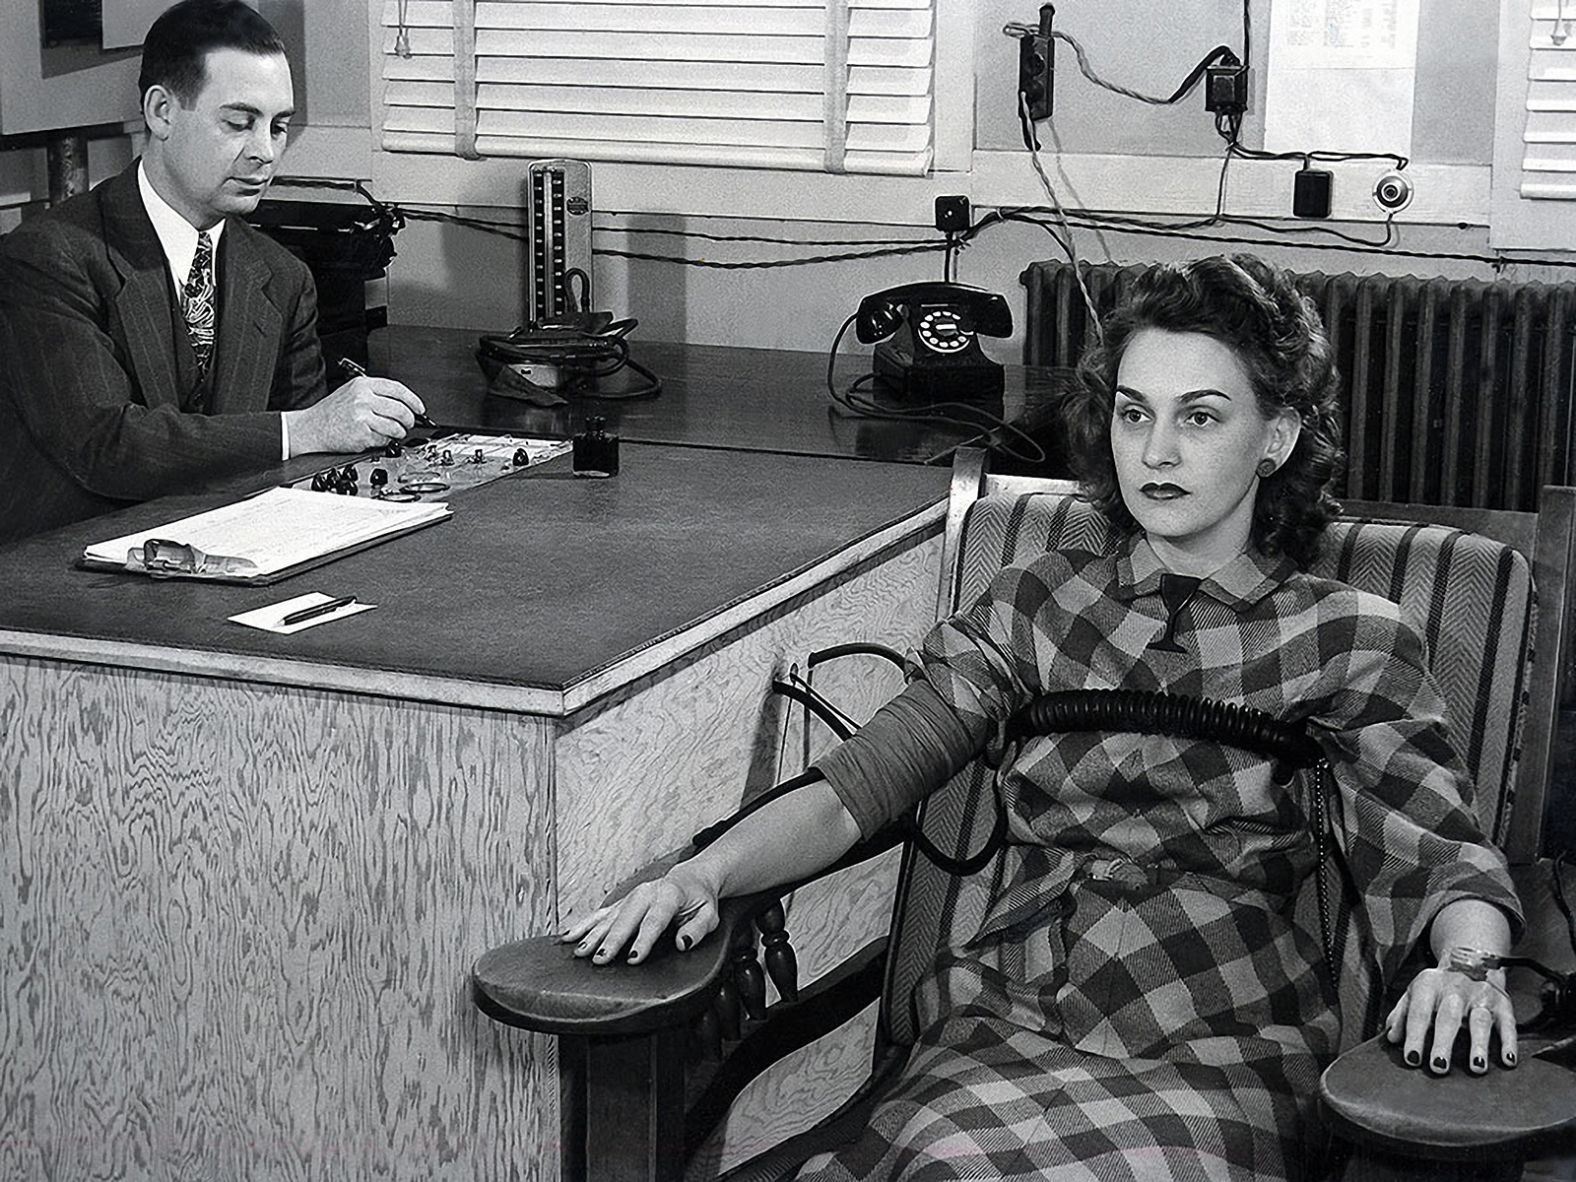 Lie-detection tests were administered as part of security screening for the Manhattan Project.